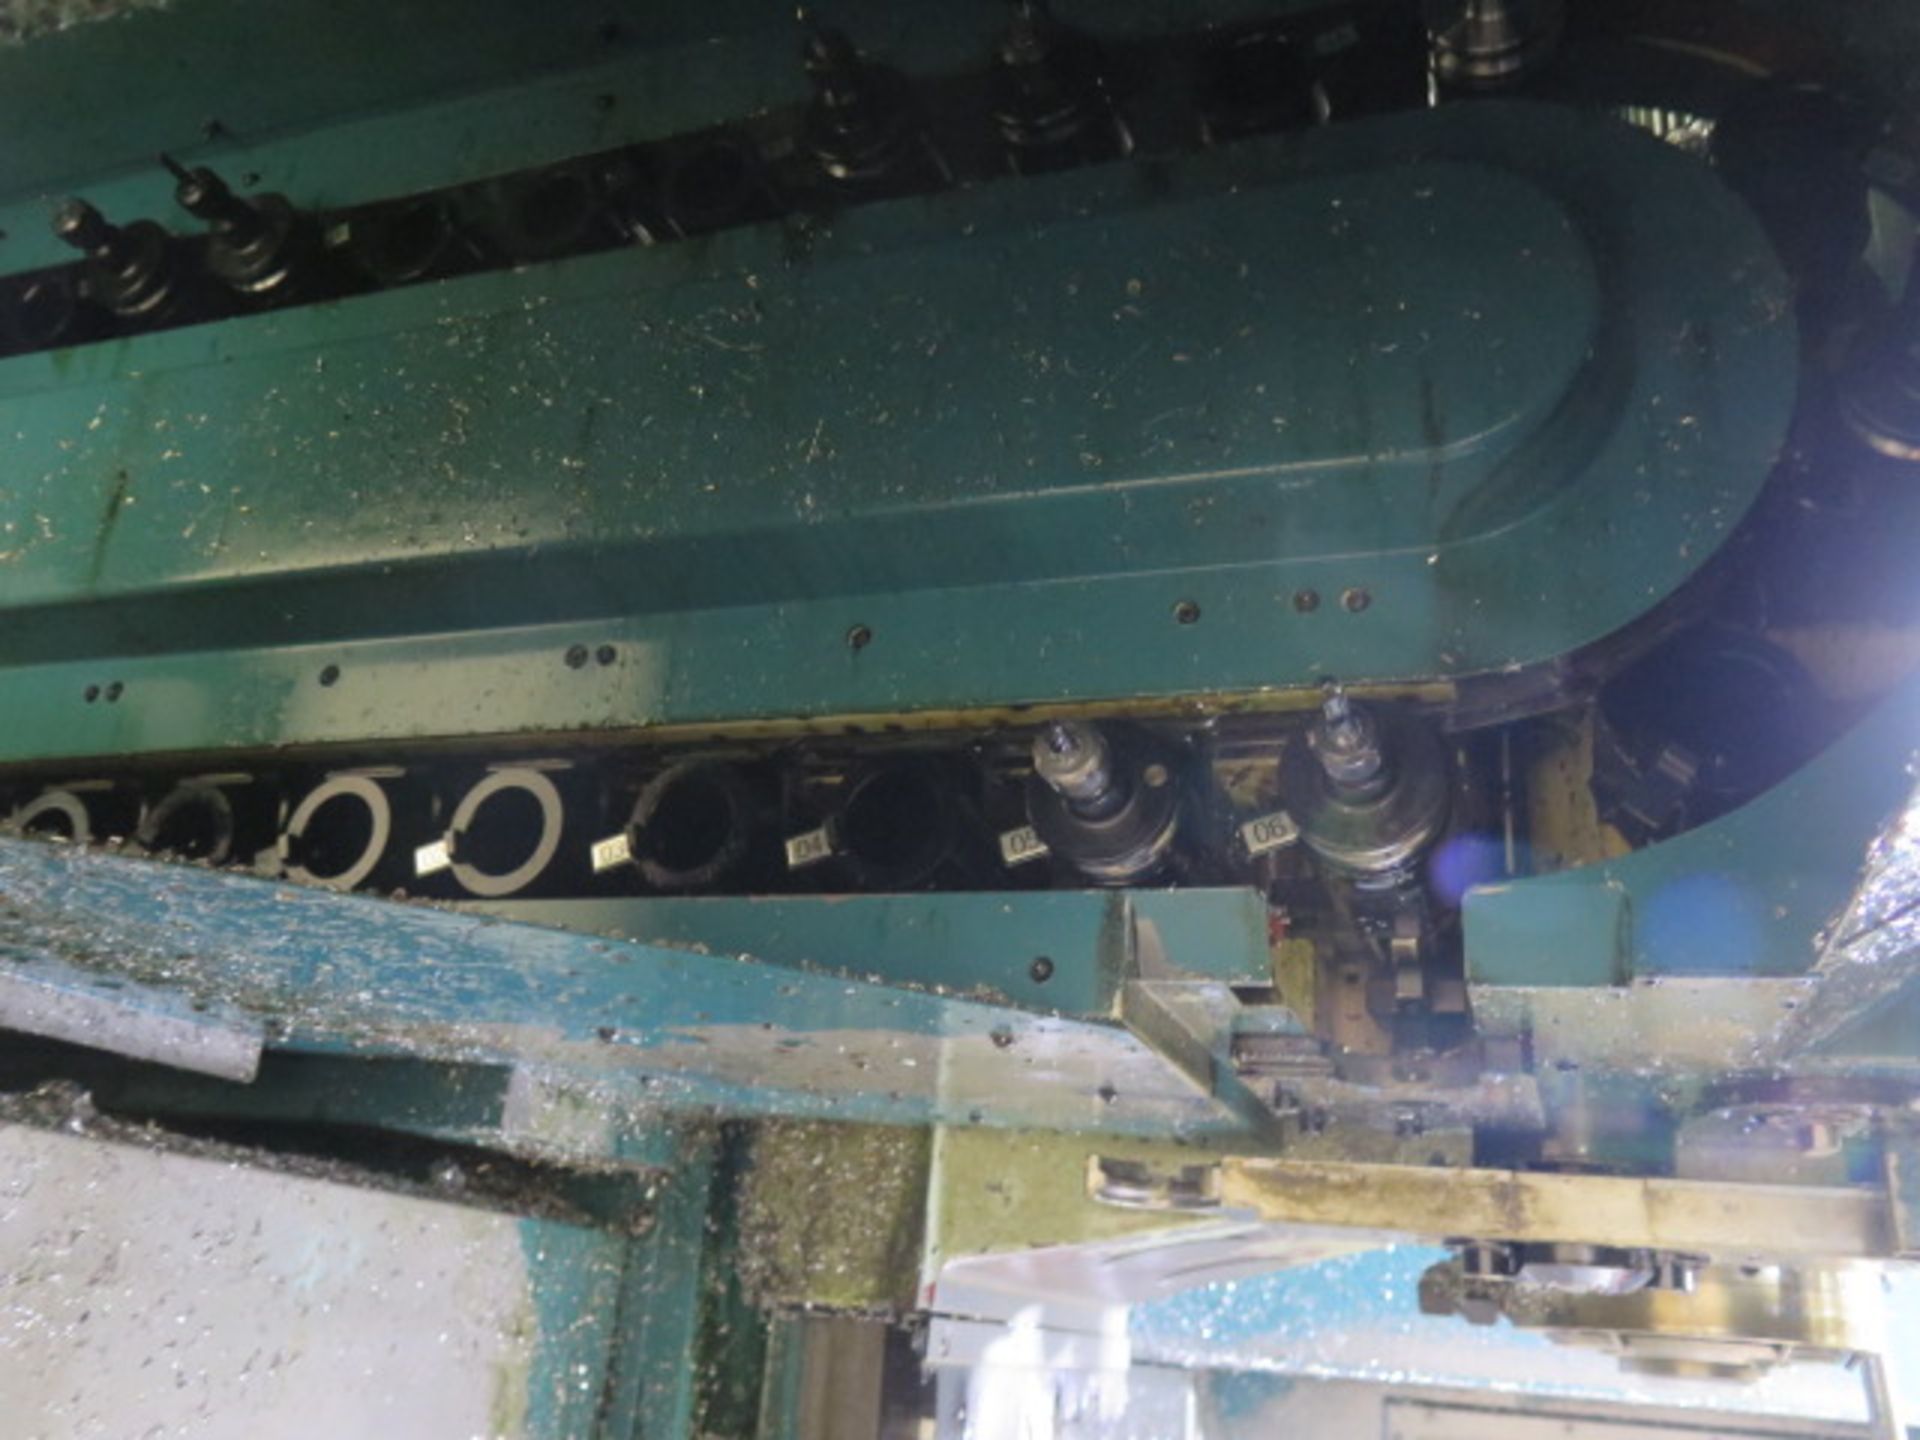 Matsuura RA-3F 2-Pallet CNC Vertical Machining Center s/n 930210424 w/ Yasnac i-80 Controls, Hand Wh - Image 9 of 20